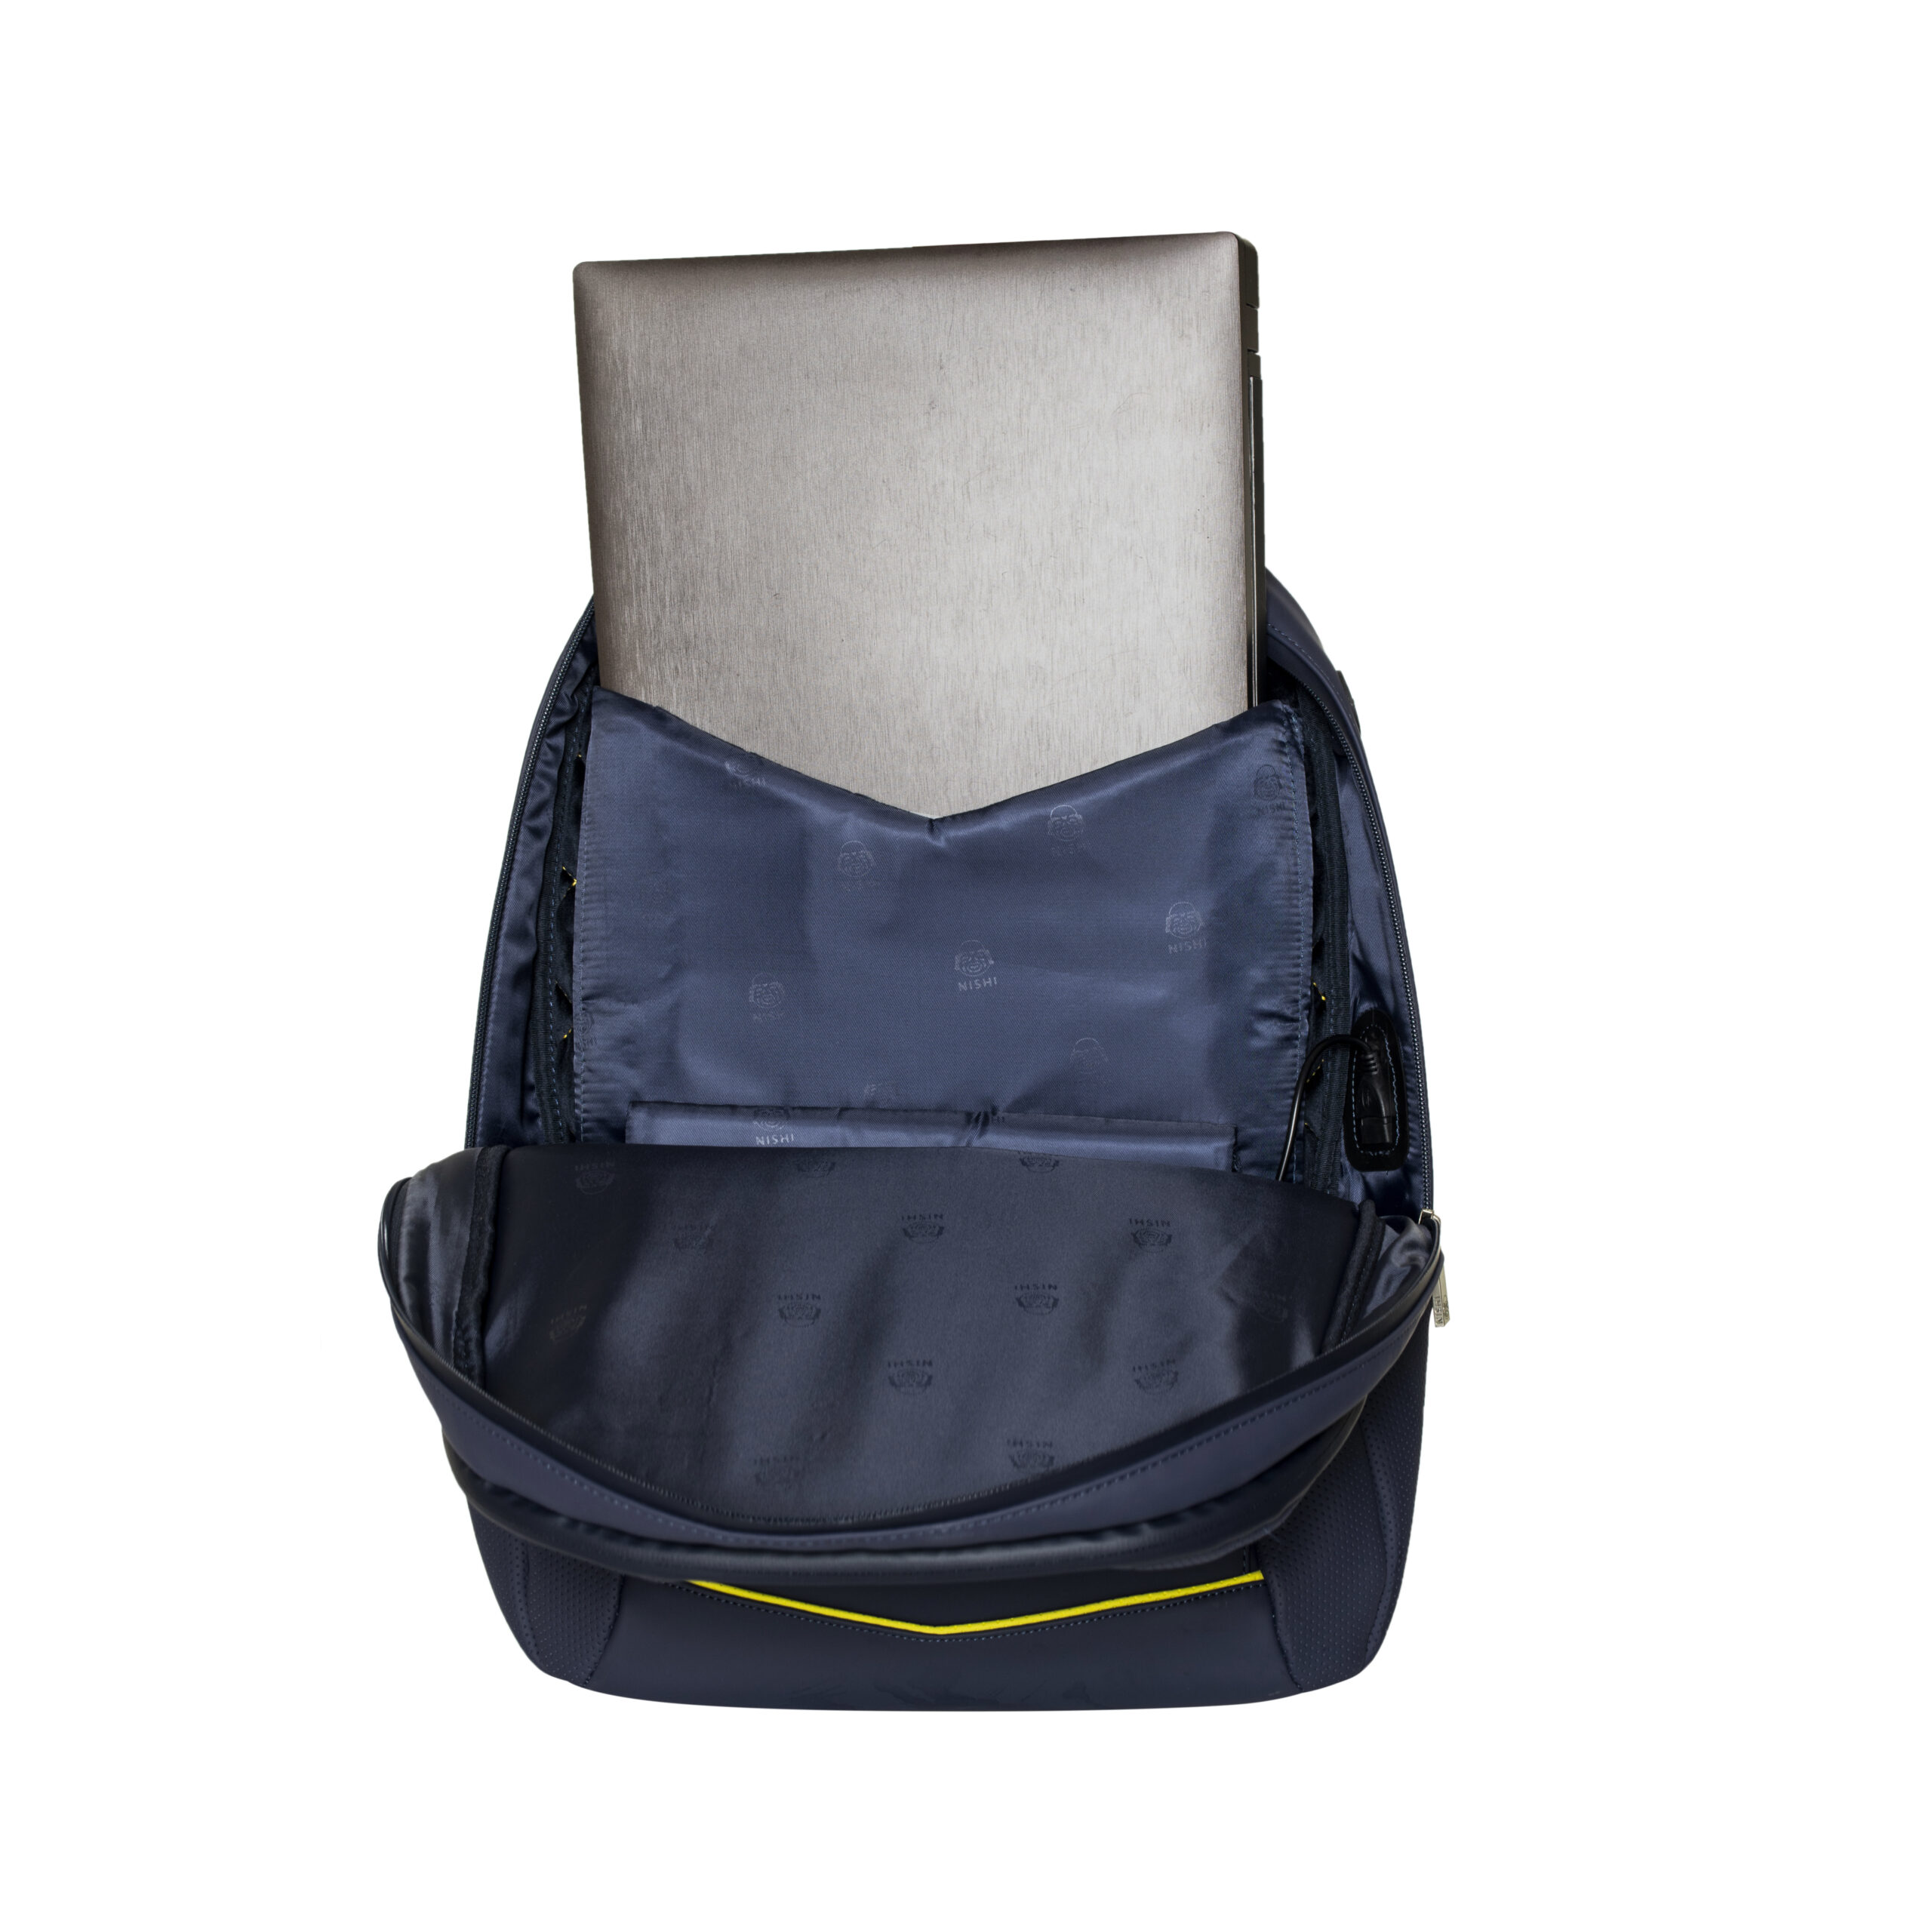 Business backpack - Plush Padded Laptop Section